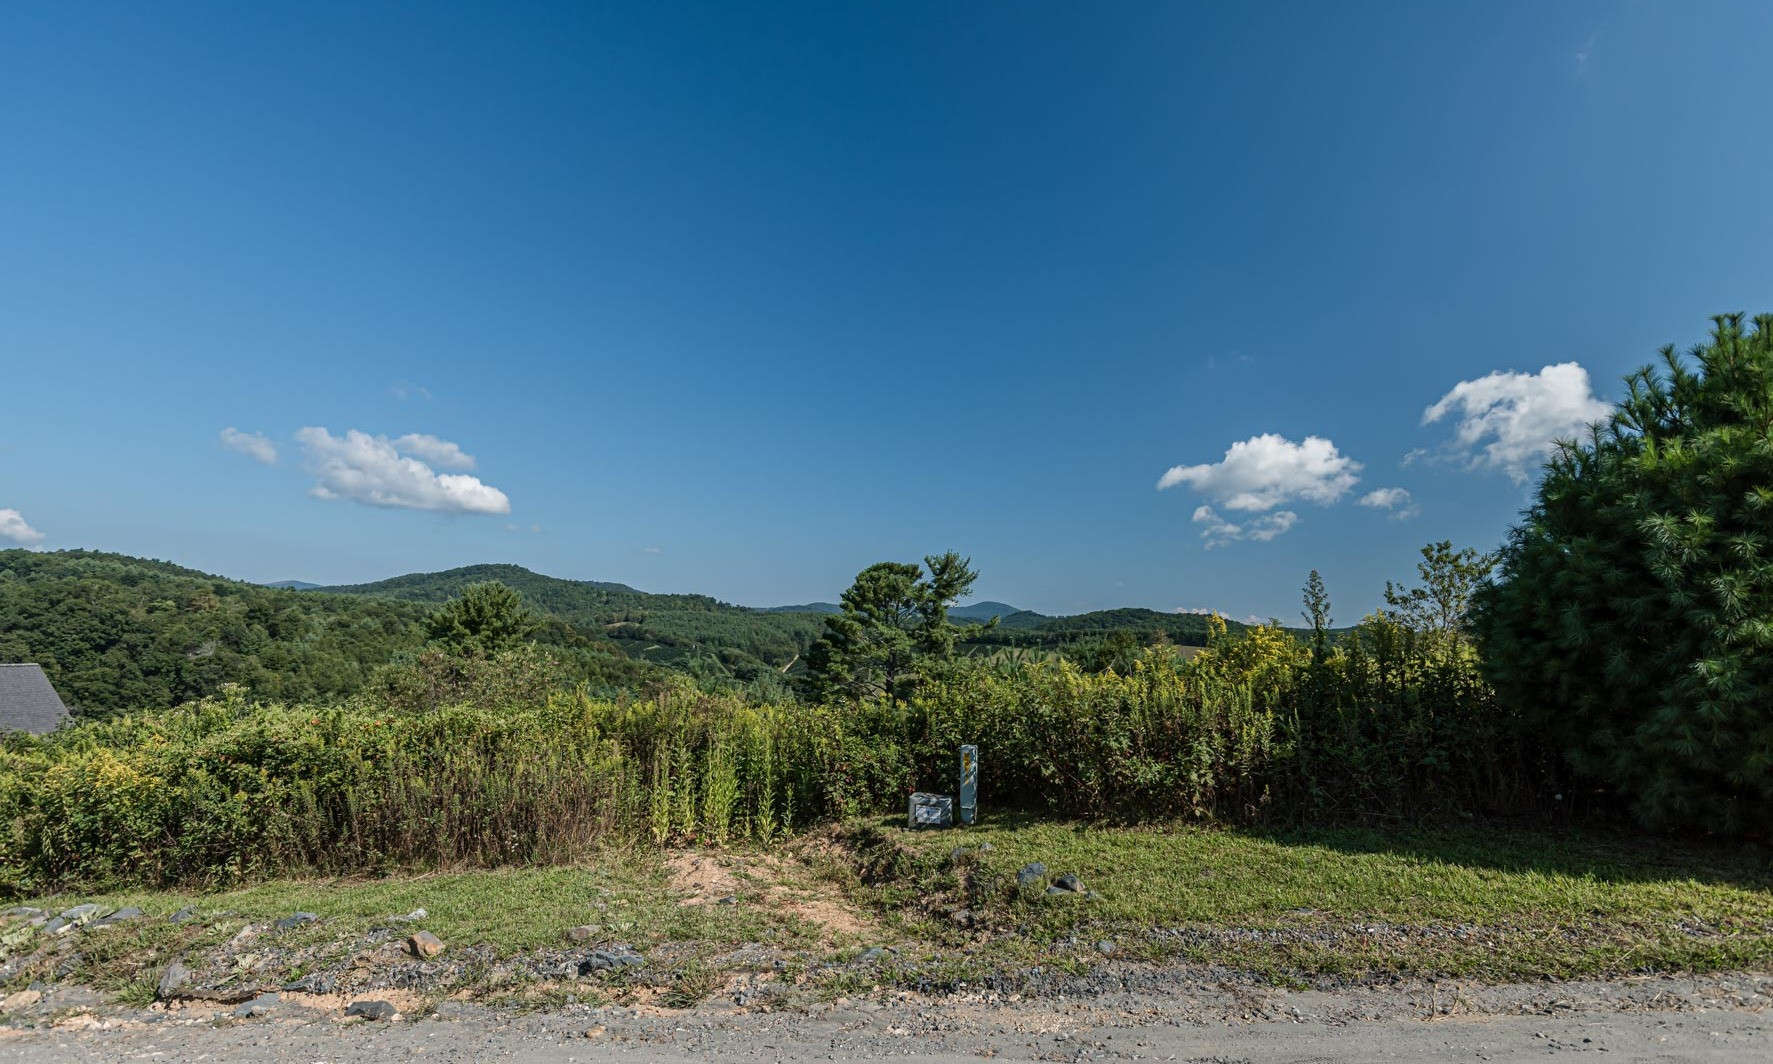 Build your dream home or cabin here on this 1.88 acre homesite located in Green Meadows Estates, a well established community located on the banks of the South Fork of the New River in the Todd area of Southern Ashe County.